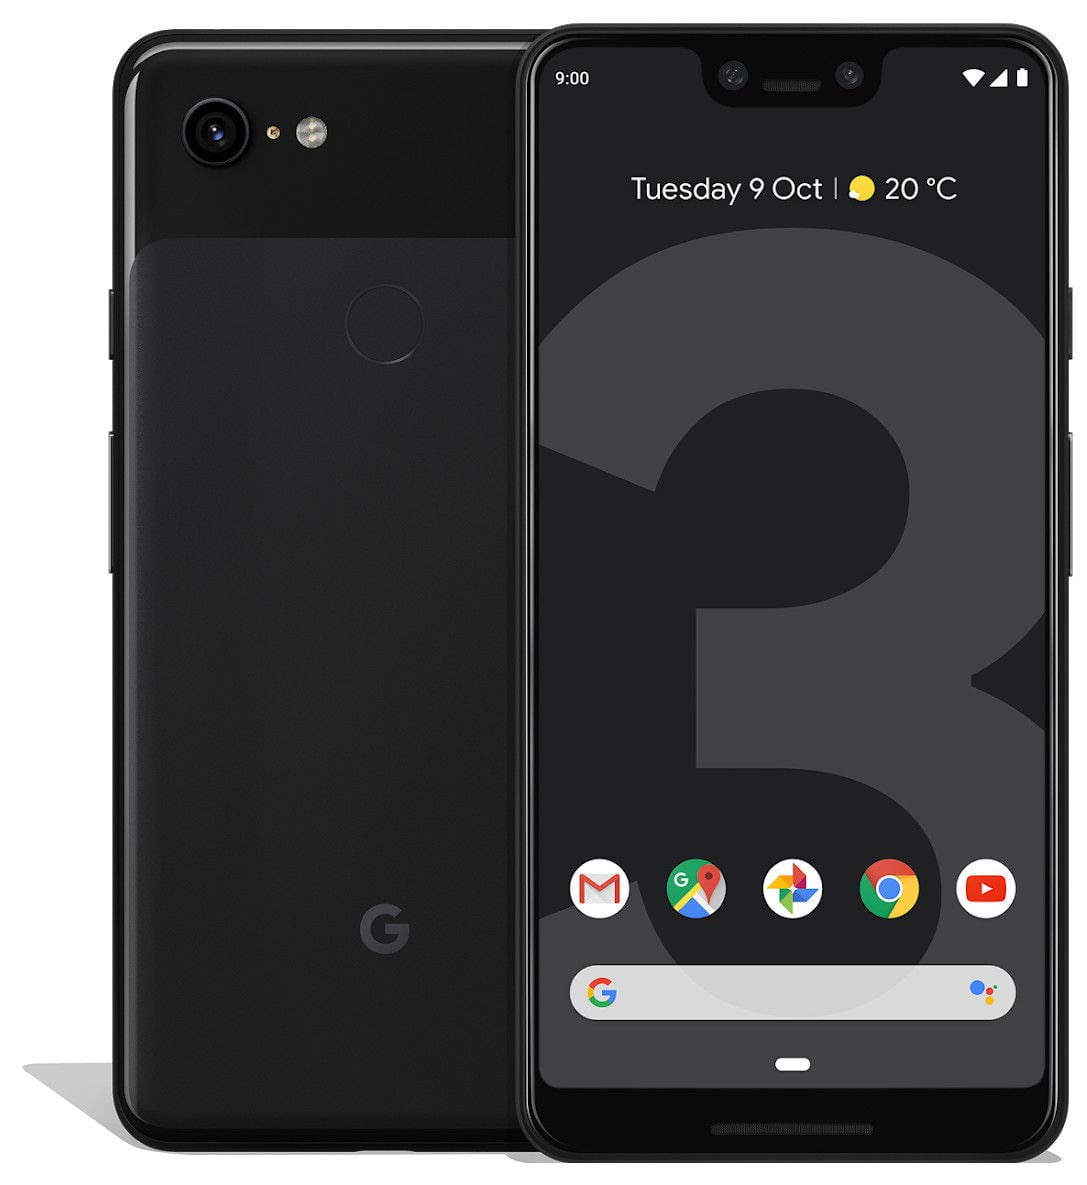 Details about   Google Pixel 3 64GB GSM+CDMA Unlocked 4G LTE Android Smartphone Black/White